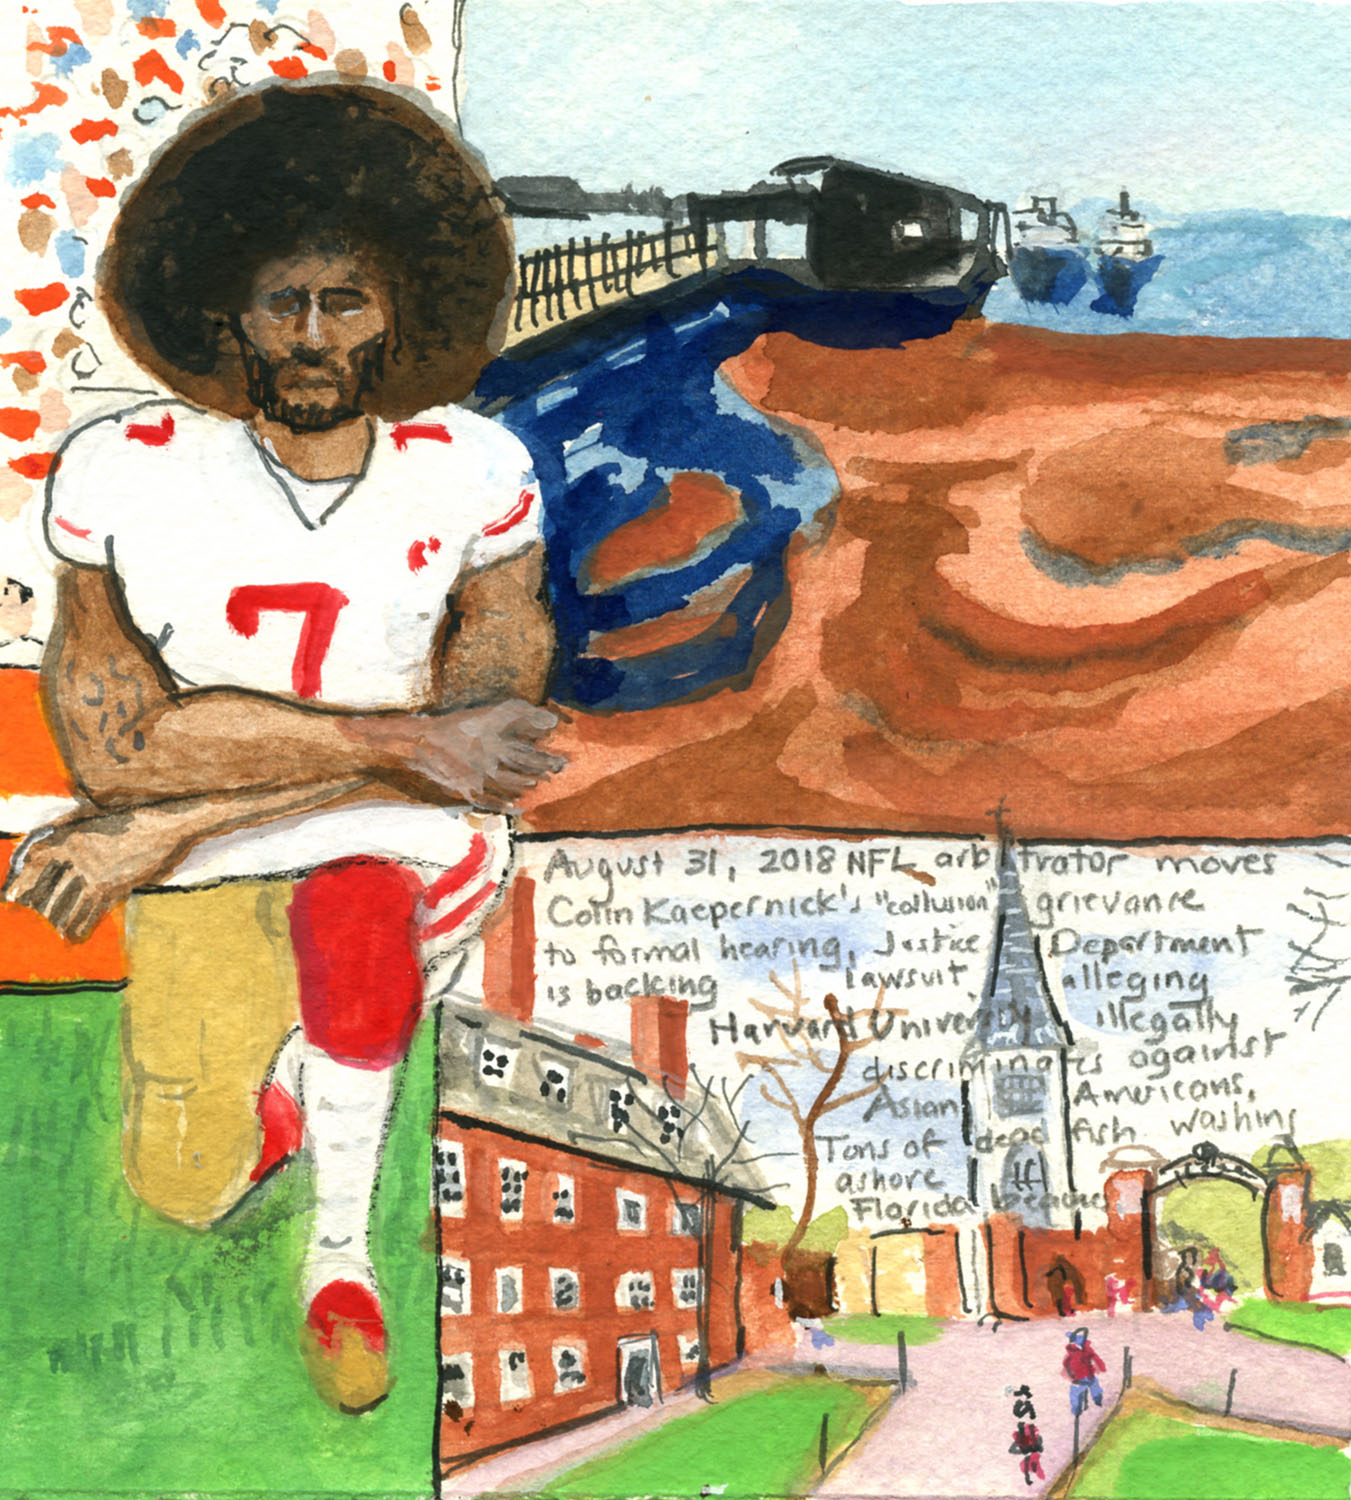 Day 1,014 (Aug. 31, 2018) <br>Watercolor, gouache, graphite on paper, 6 x 5 ½ in. <br><i>NFL arbitrator moves Colin Kaepernick’s “collusion” grievance to formal hearing, Justice Department is backing lawsuit alleging Harvard University illegally discriminates against Asian Americans, Tons of dead fish washing ashore Florida beaches.</i>